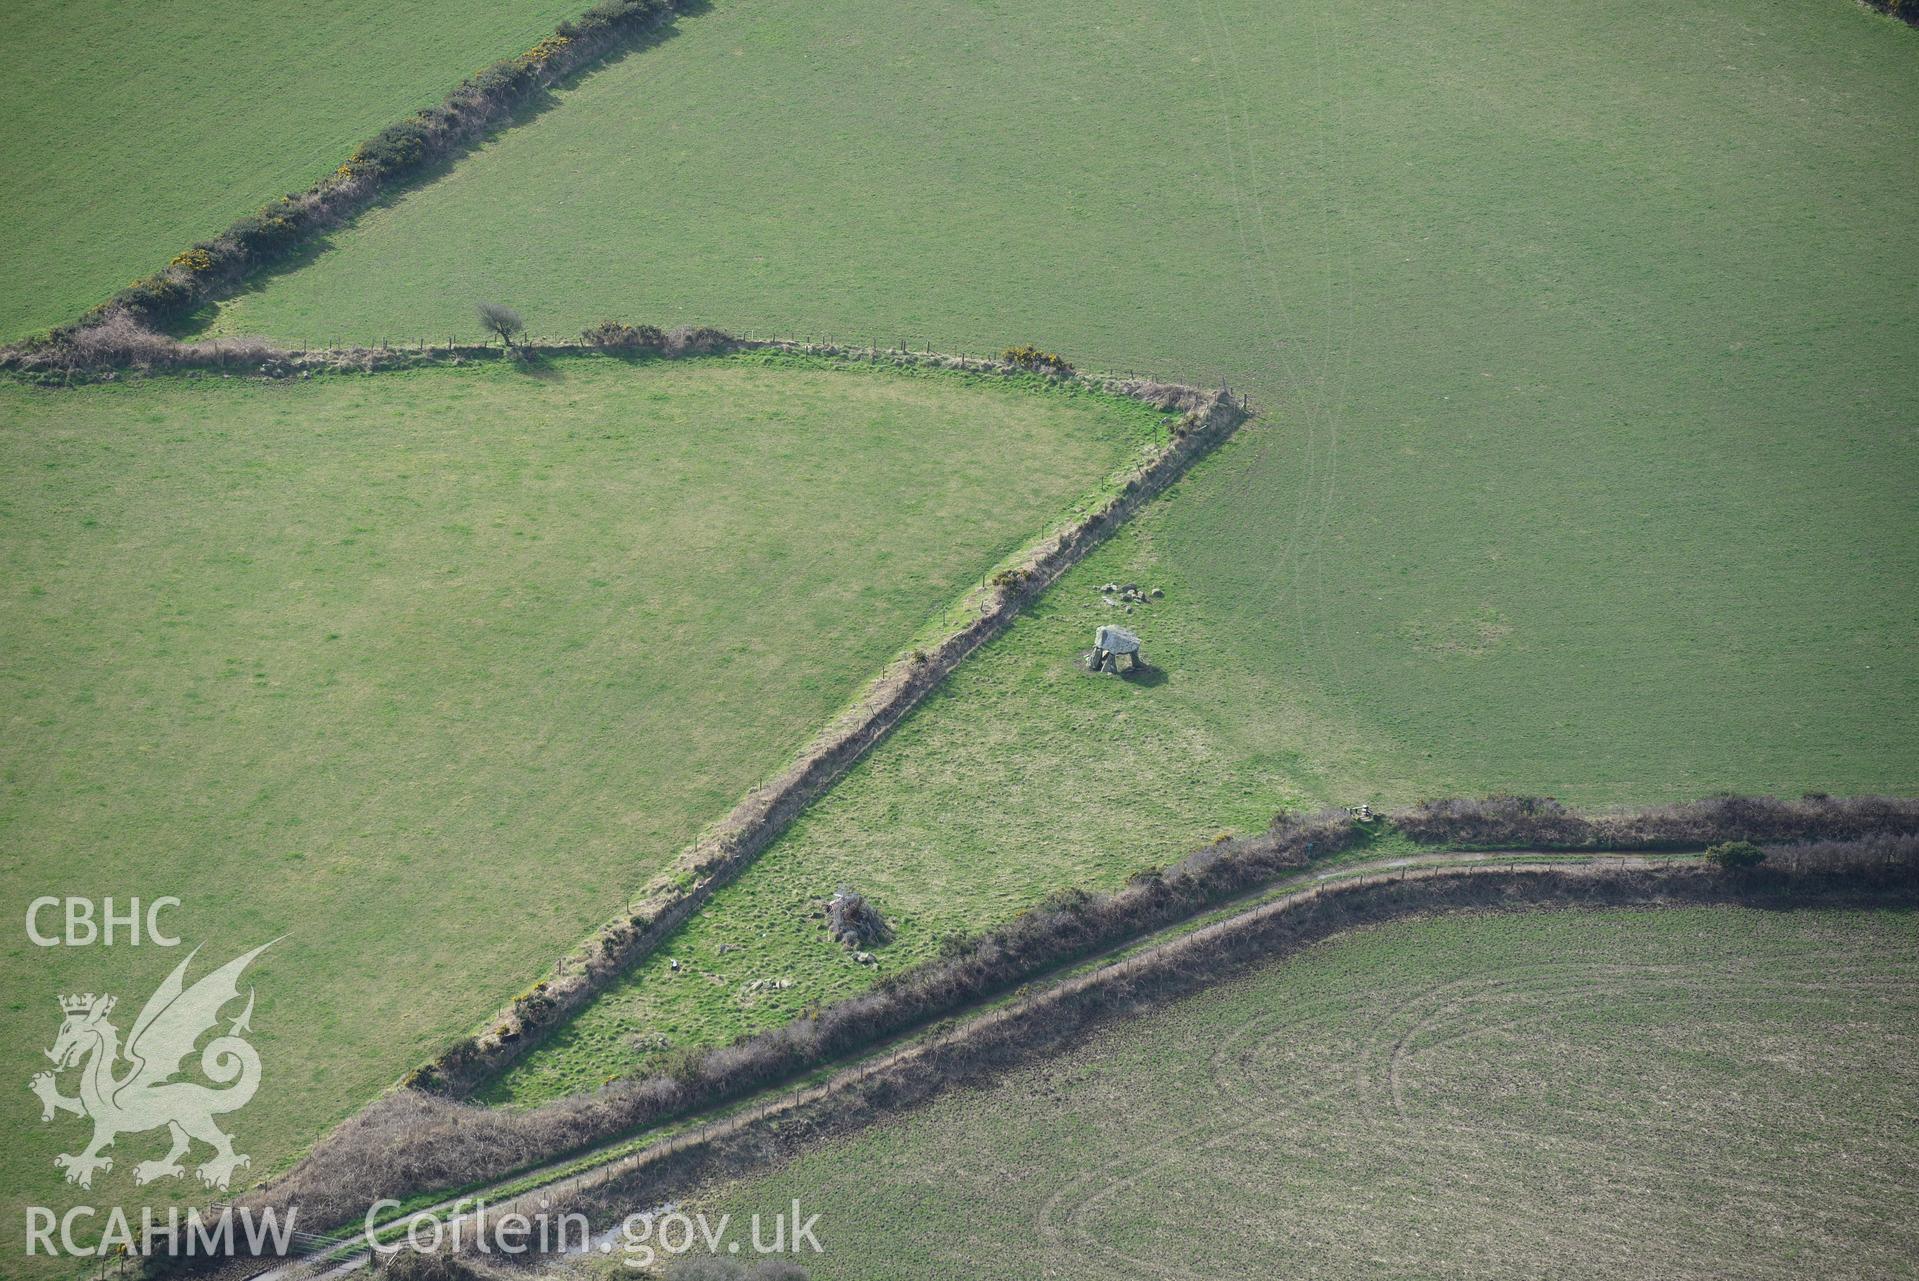 Llech-y-Drybedd chambered tomb, near Moylgrove, Cardigan. Oblique aerial photograph taken during the Royal Commission's programme of archaeological aerial reconnaissance by Toby Driver on 13th March 2015.